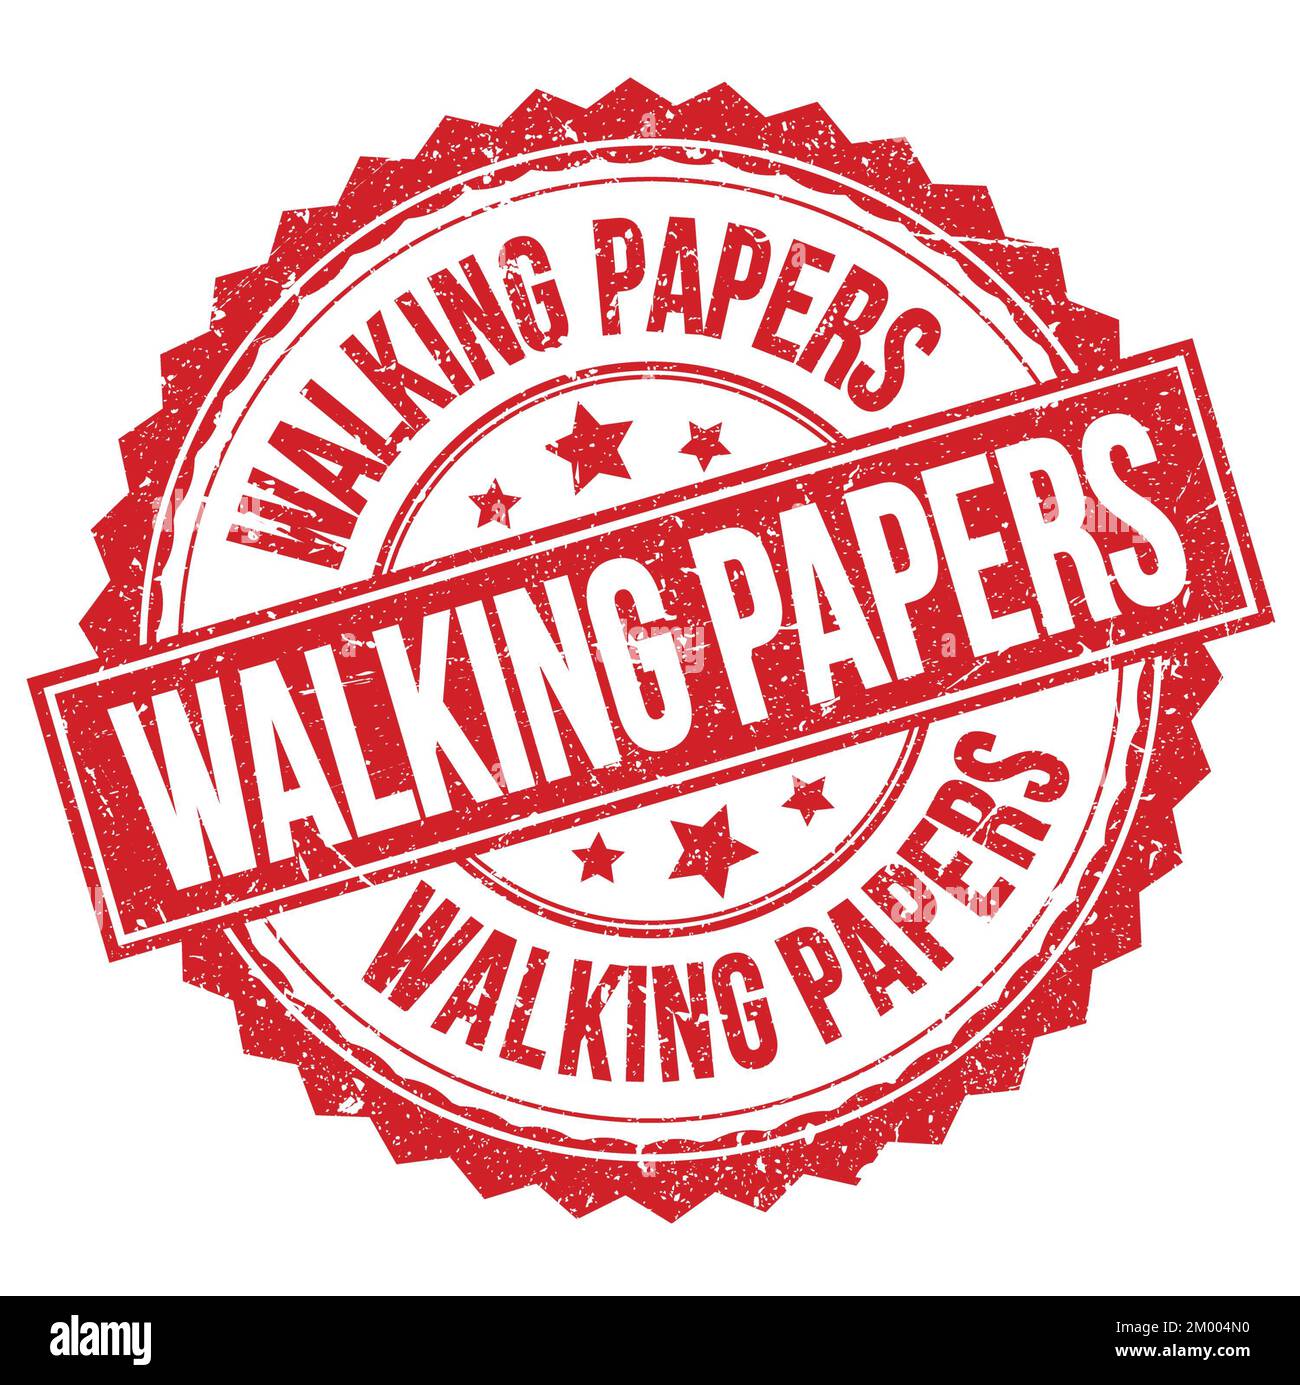 WALKING PAPERS text written on green-black grungy stamp sign Stock Photo -  Alamy